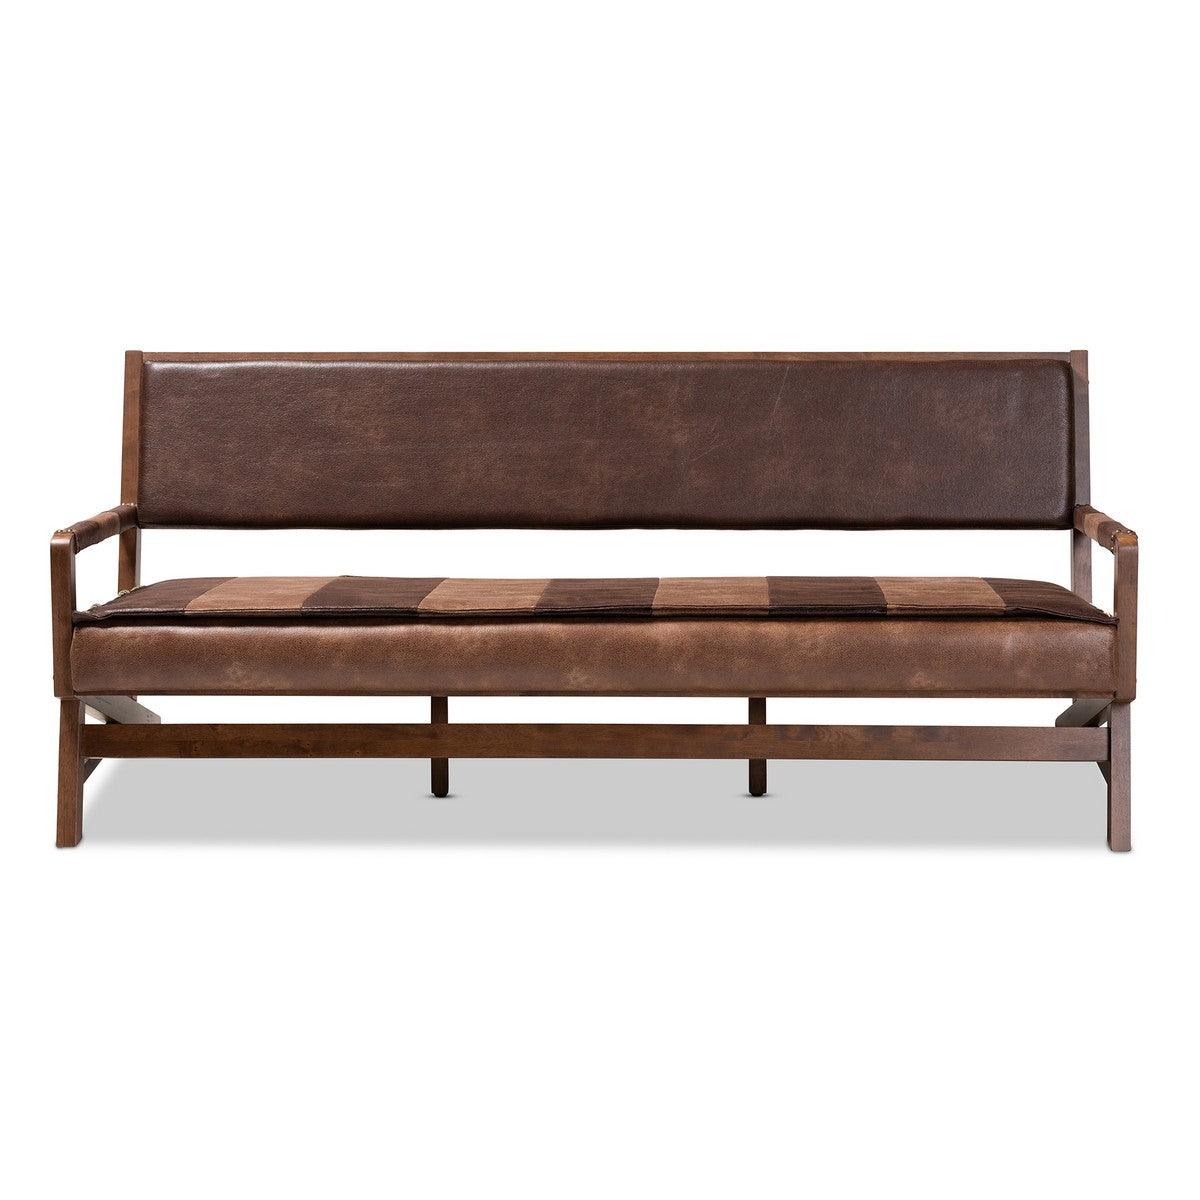 Baxton Studio Rovelyn Rustic Brown Faux Leather Upholstered Walnut Finished Wood Sofa